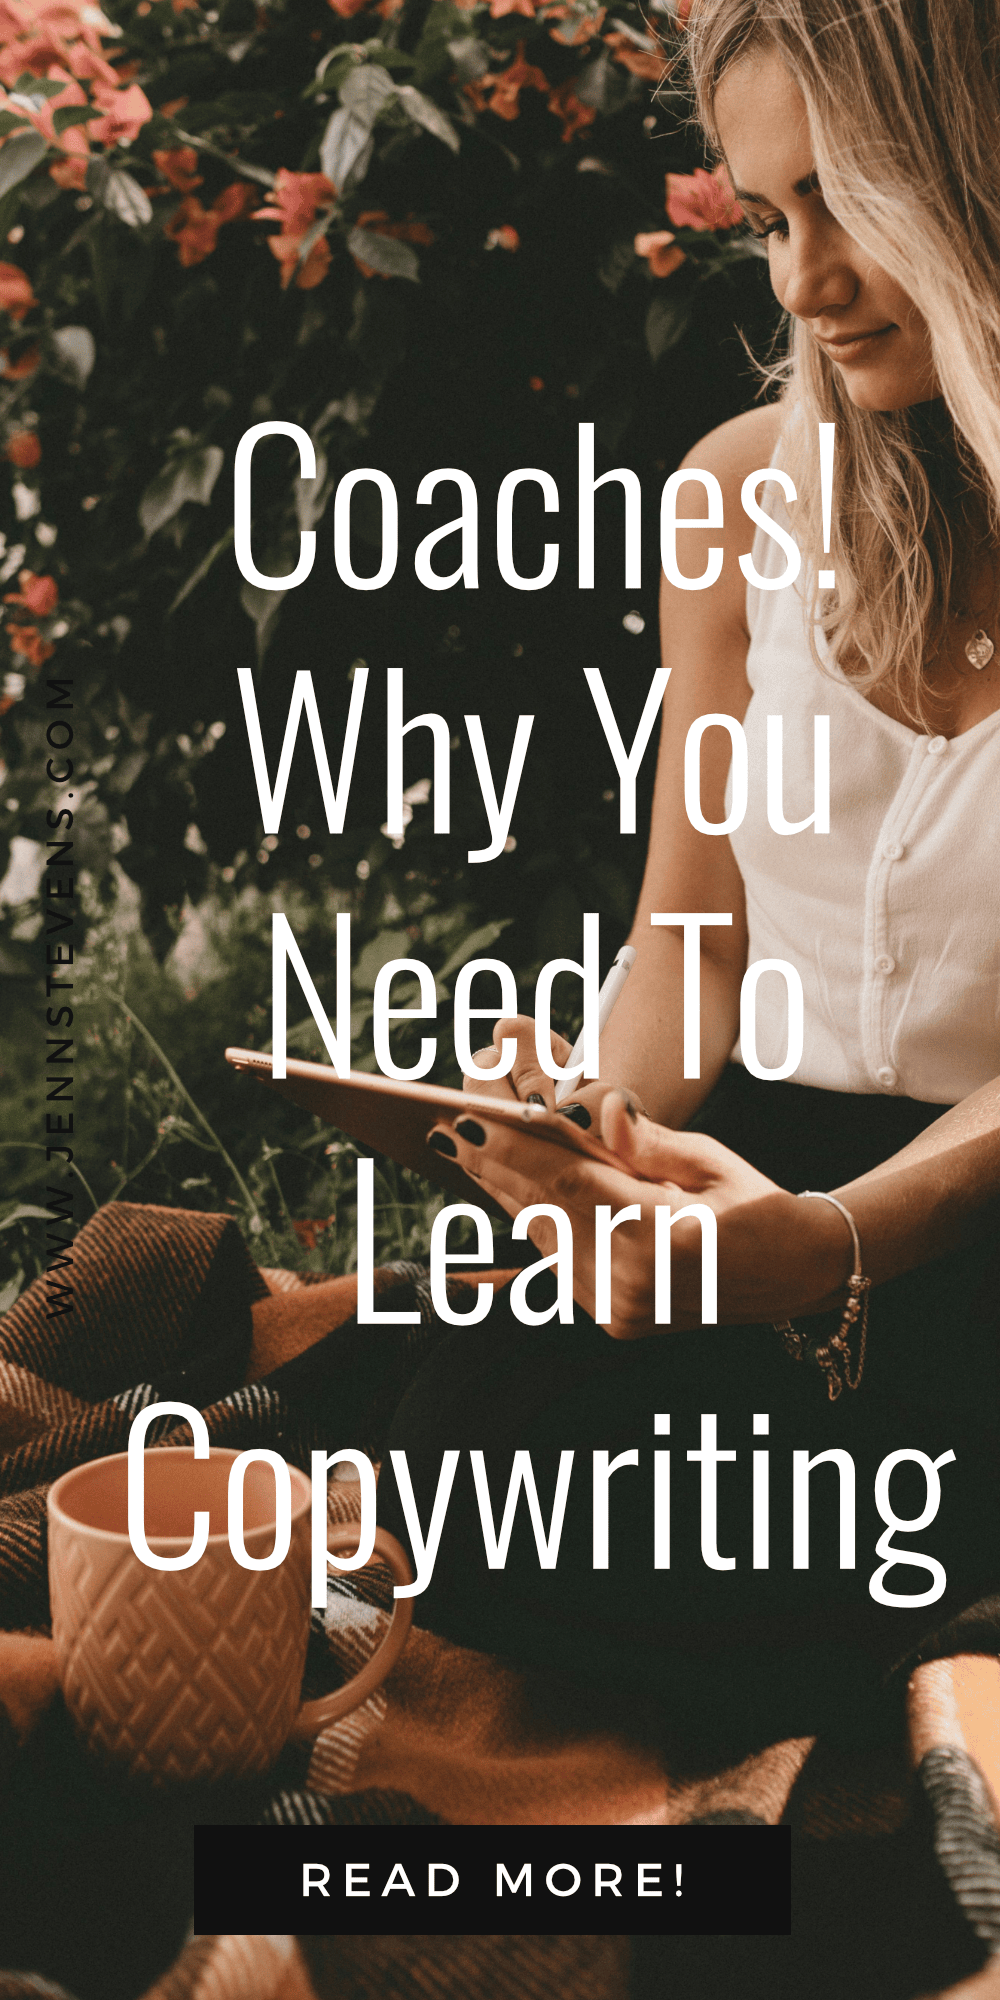 Why You Need To Learn Copywriting